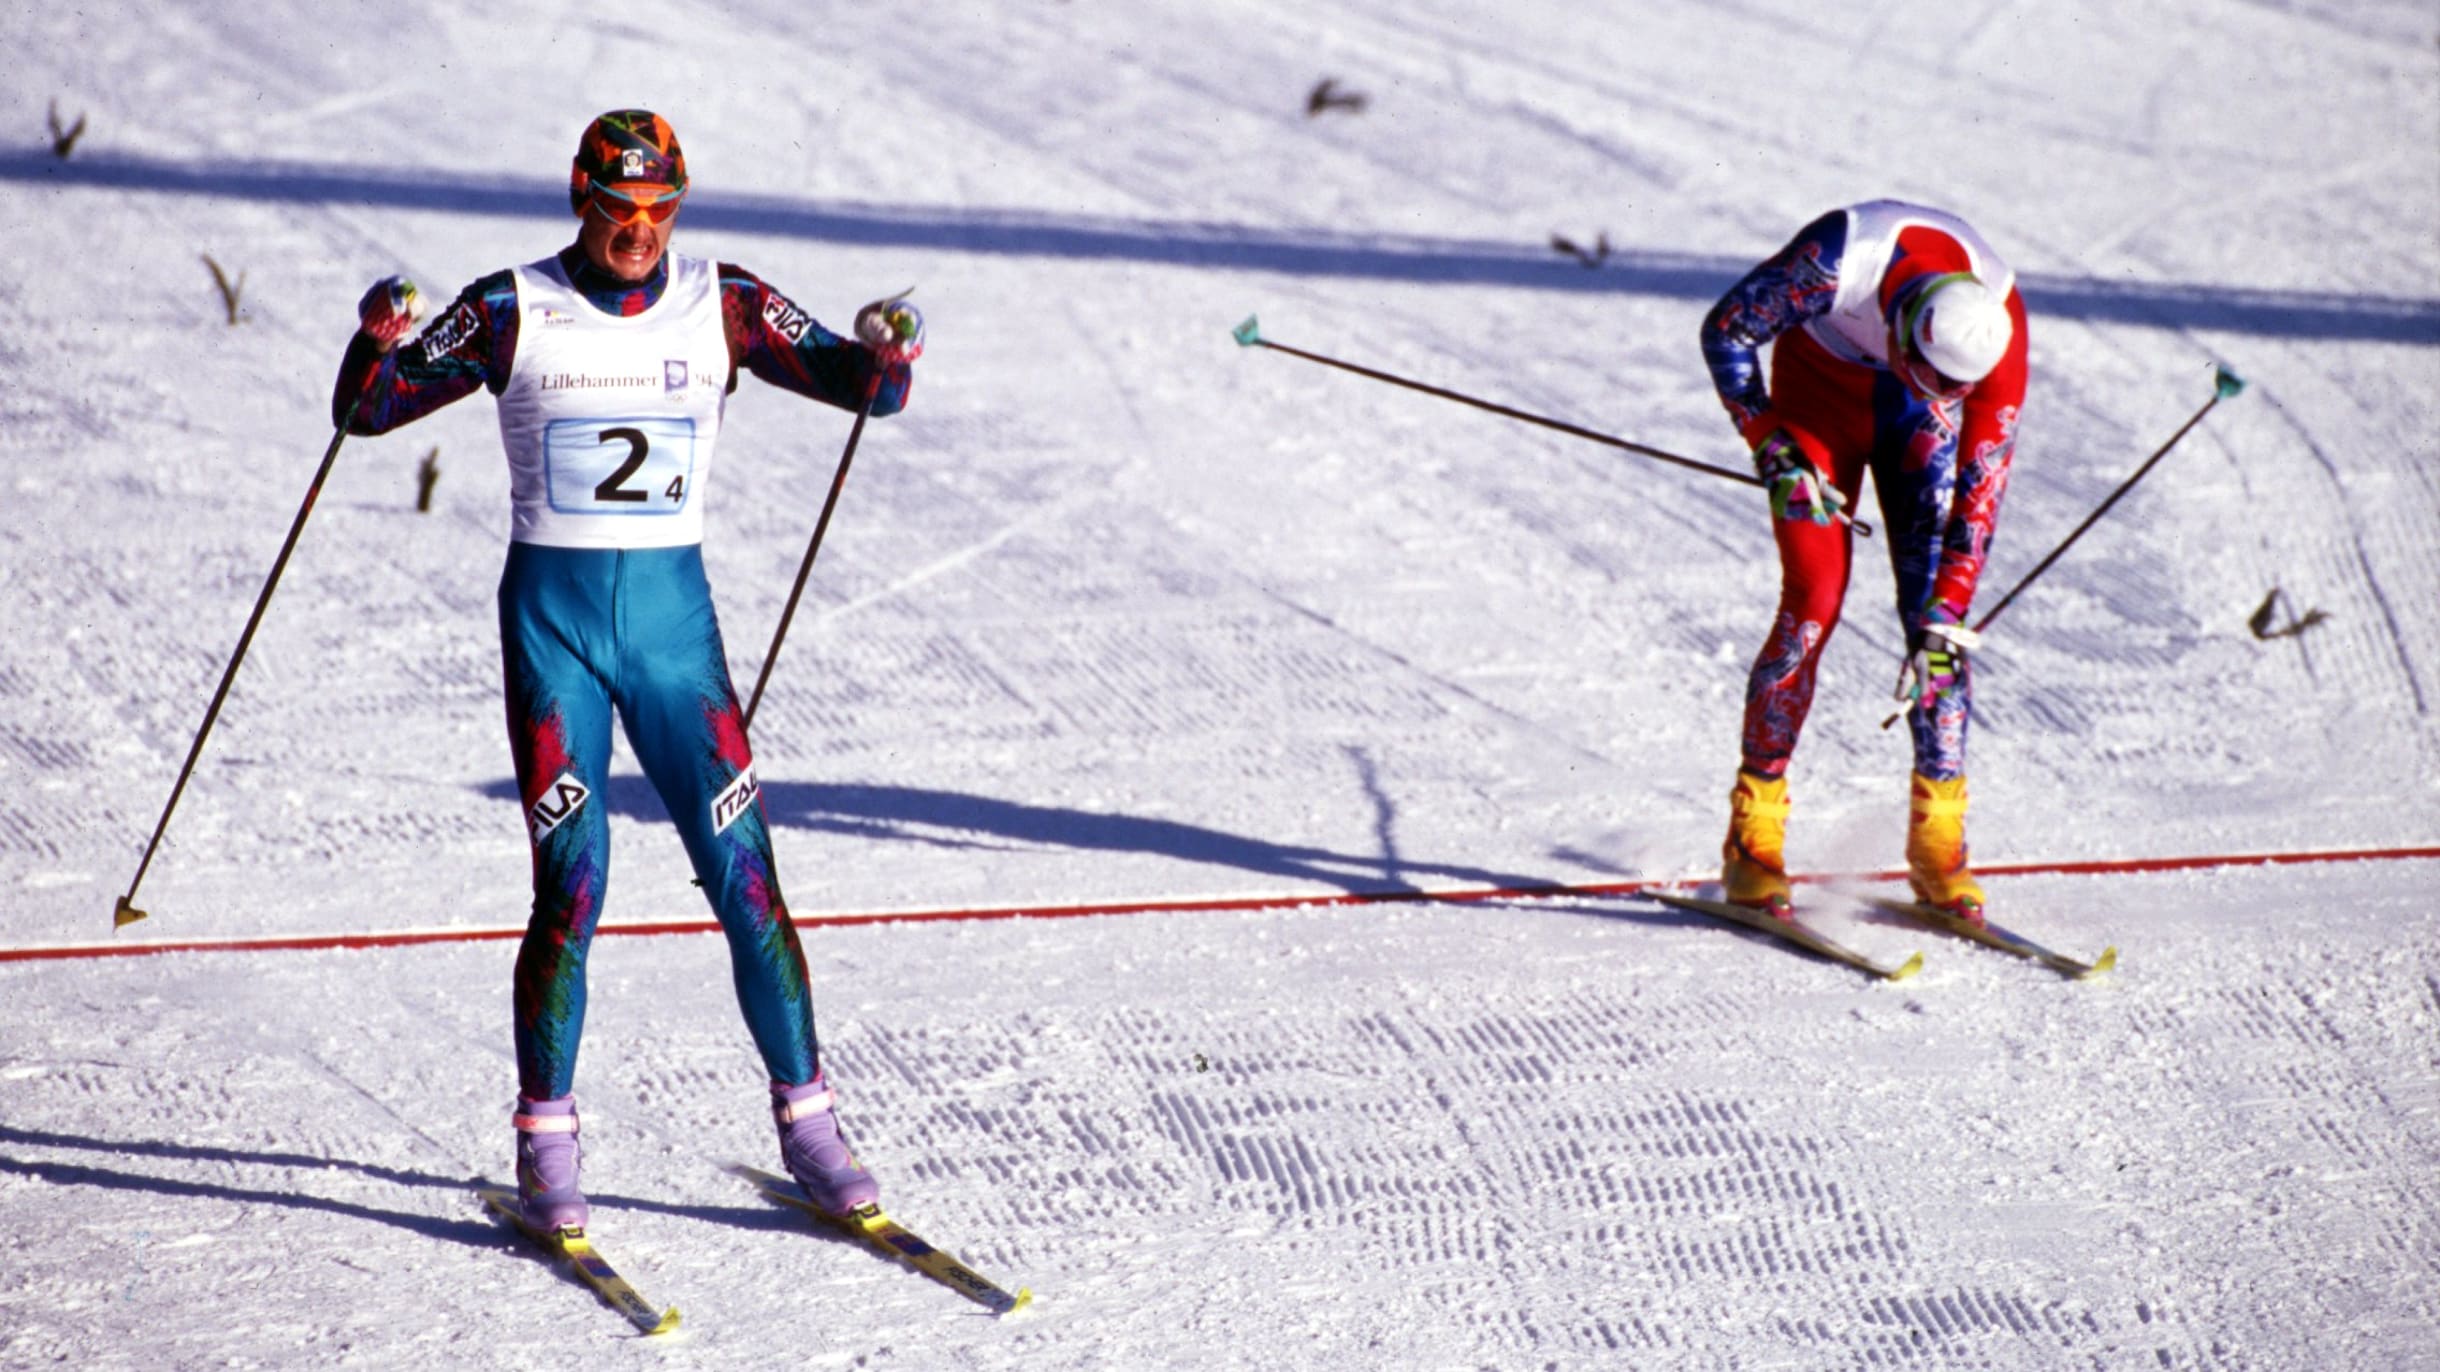 Norway vs Italy historic 90s rivalry in mens 4x10km Nordic skiing relay